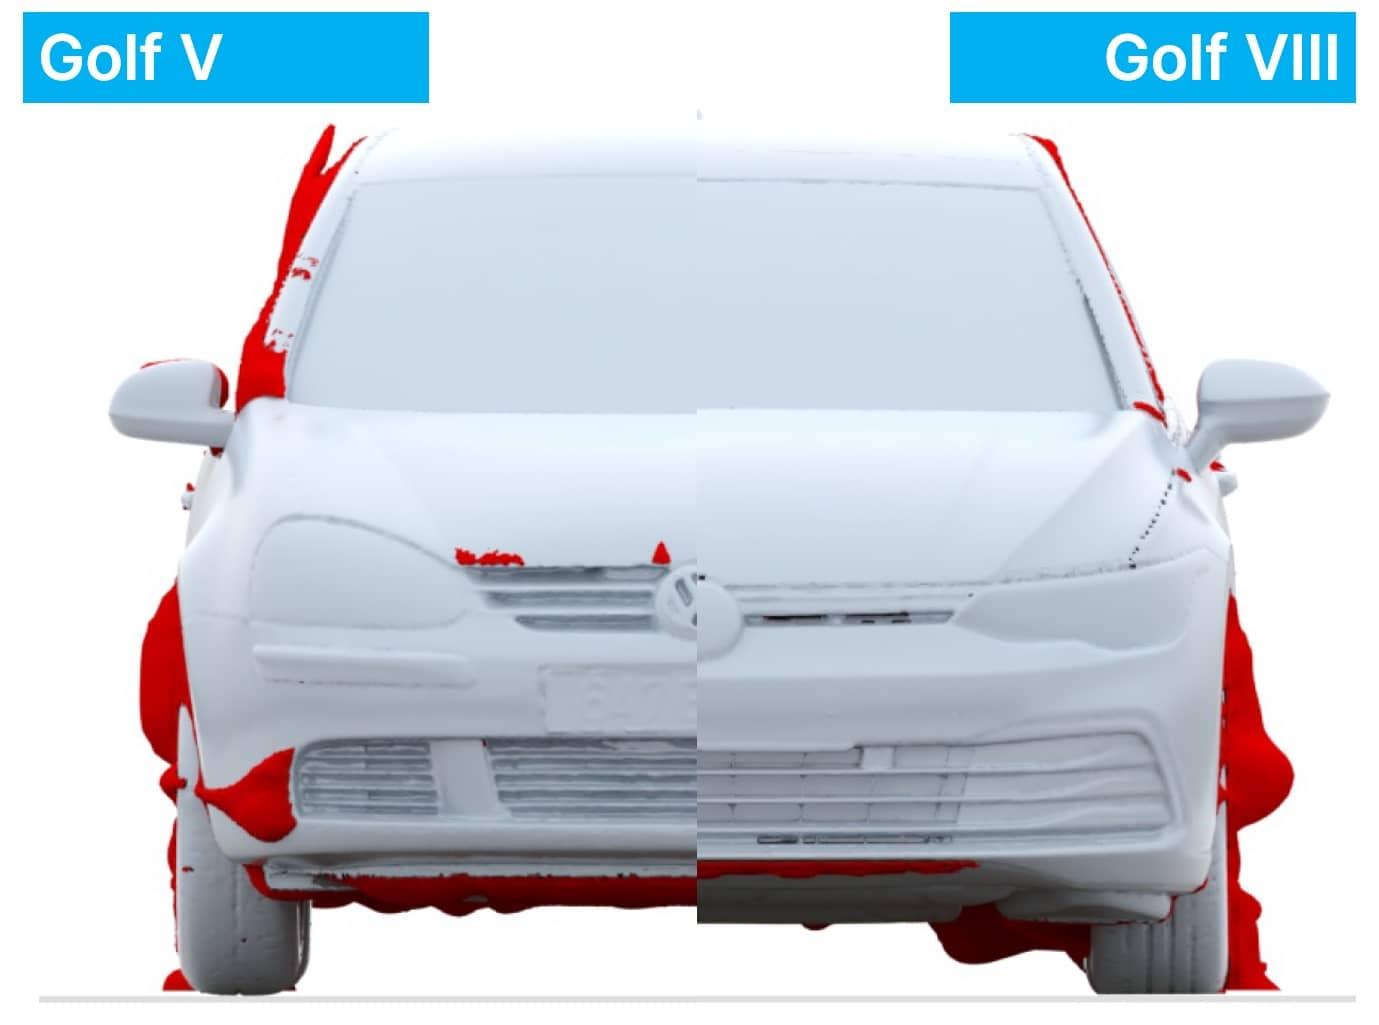 Drag analysis of Golf V versus  Golf 8 - Front view